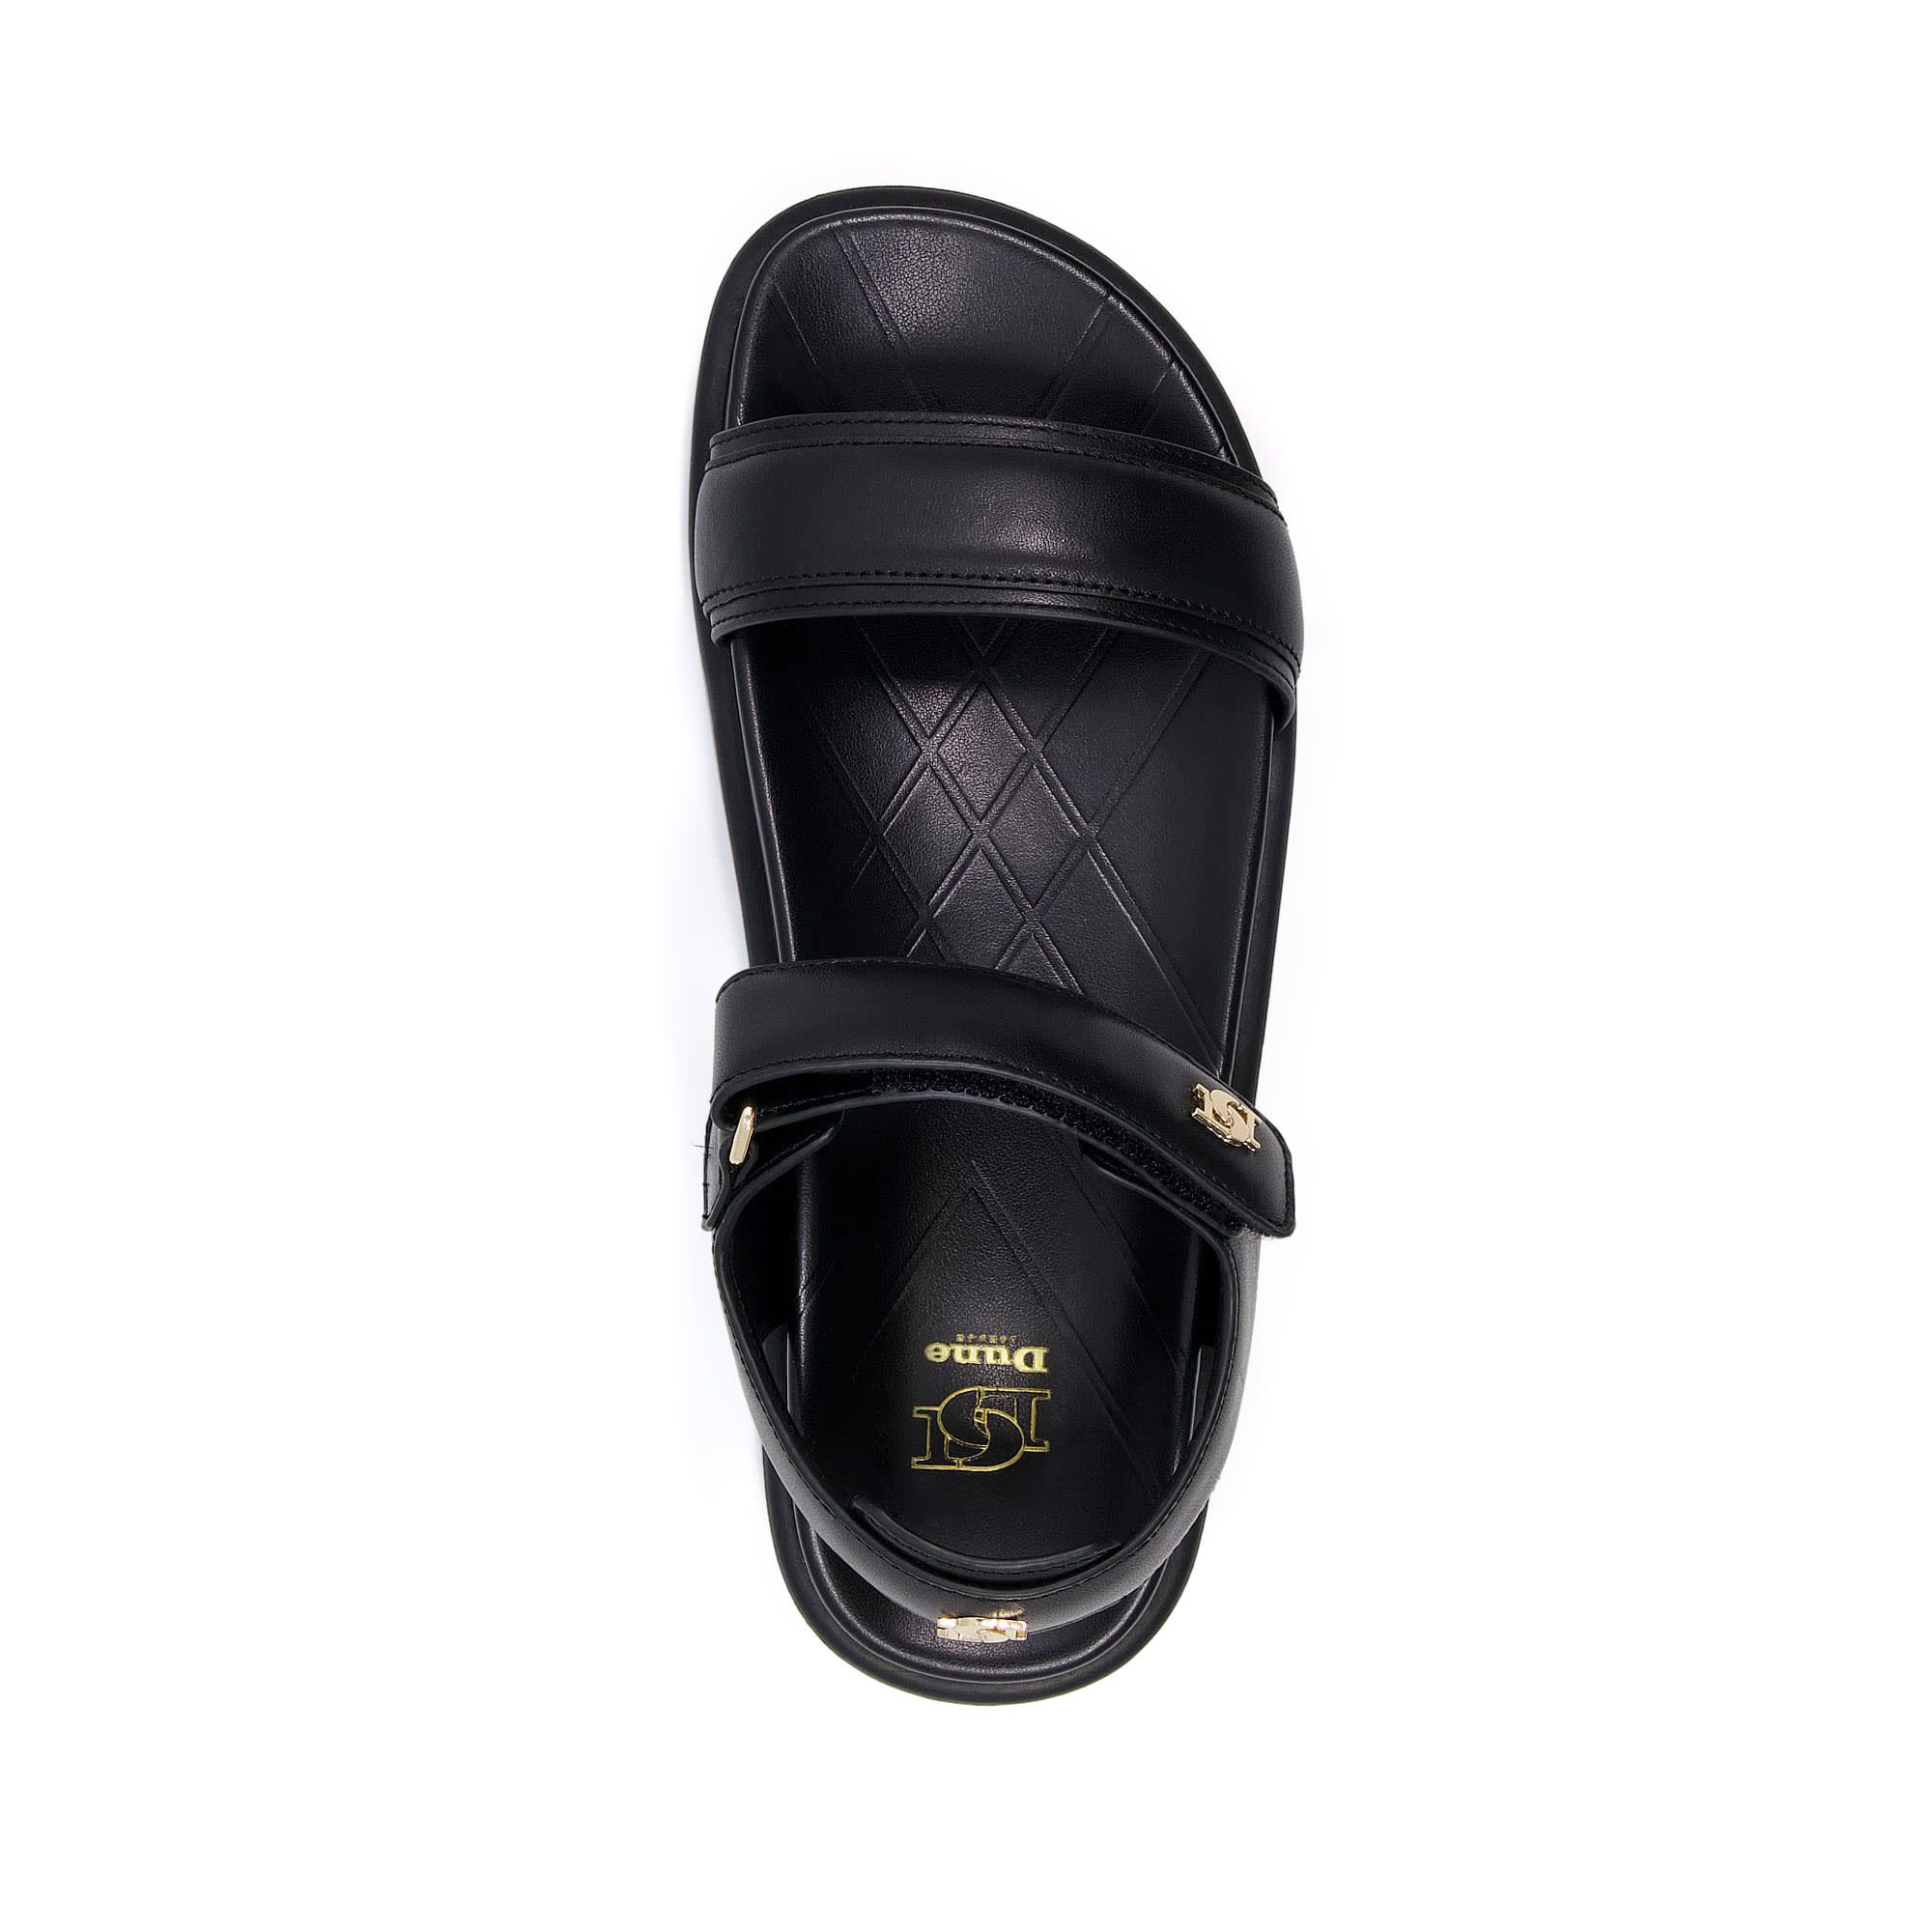 Our effortlessly cool leather sandals will offer a trend-led twist to your summer outfits. With minimal styling and a simple Velcro ankle strap, the comfortable cushioned footbed means you will never want to take them off.